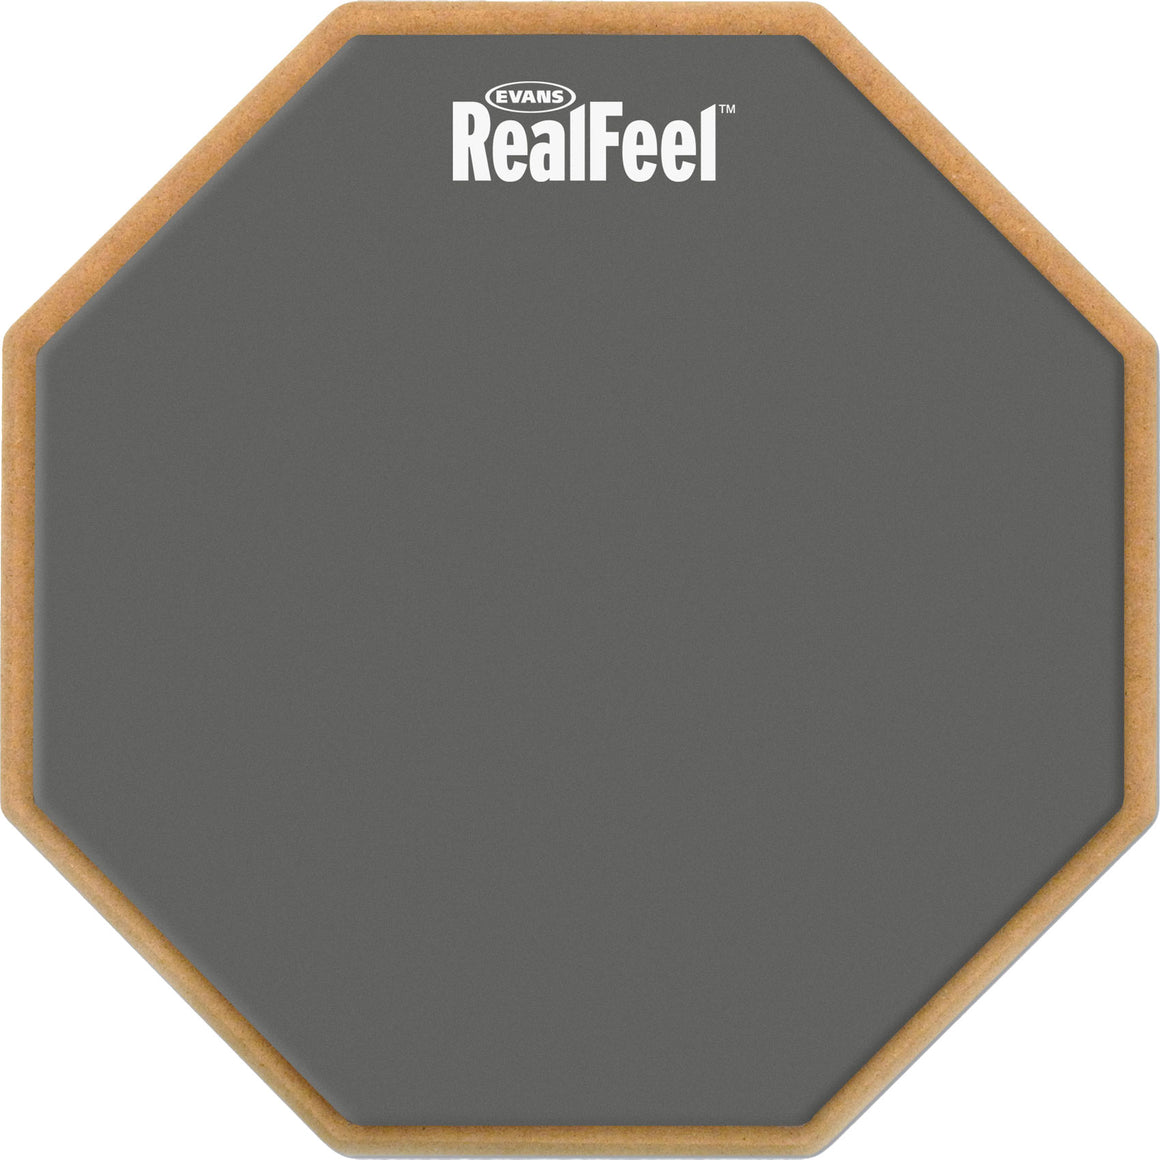 EVANS RF6D Real Feel 6" 2-Sided Practice Pad